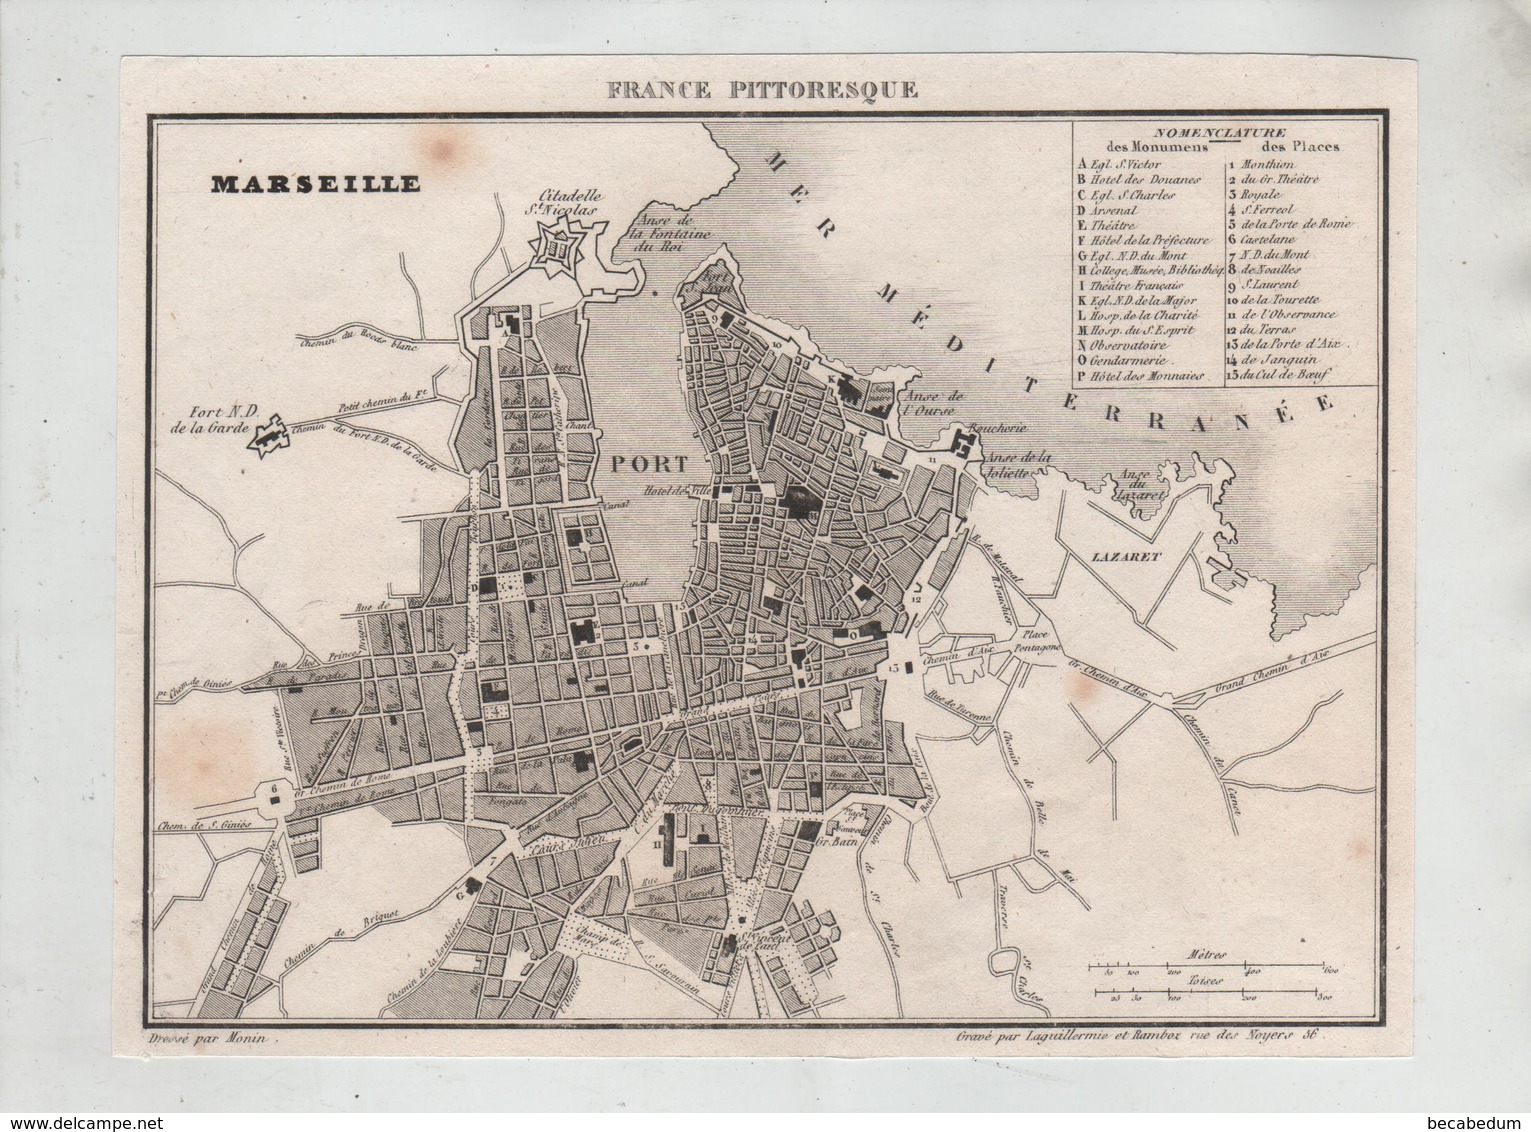 France Pittoresque 1835 Marseille Plan - Unclassified